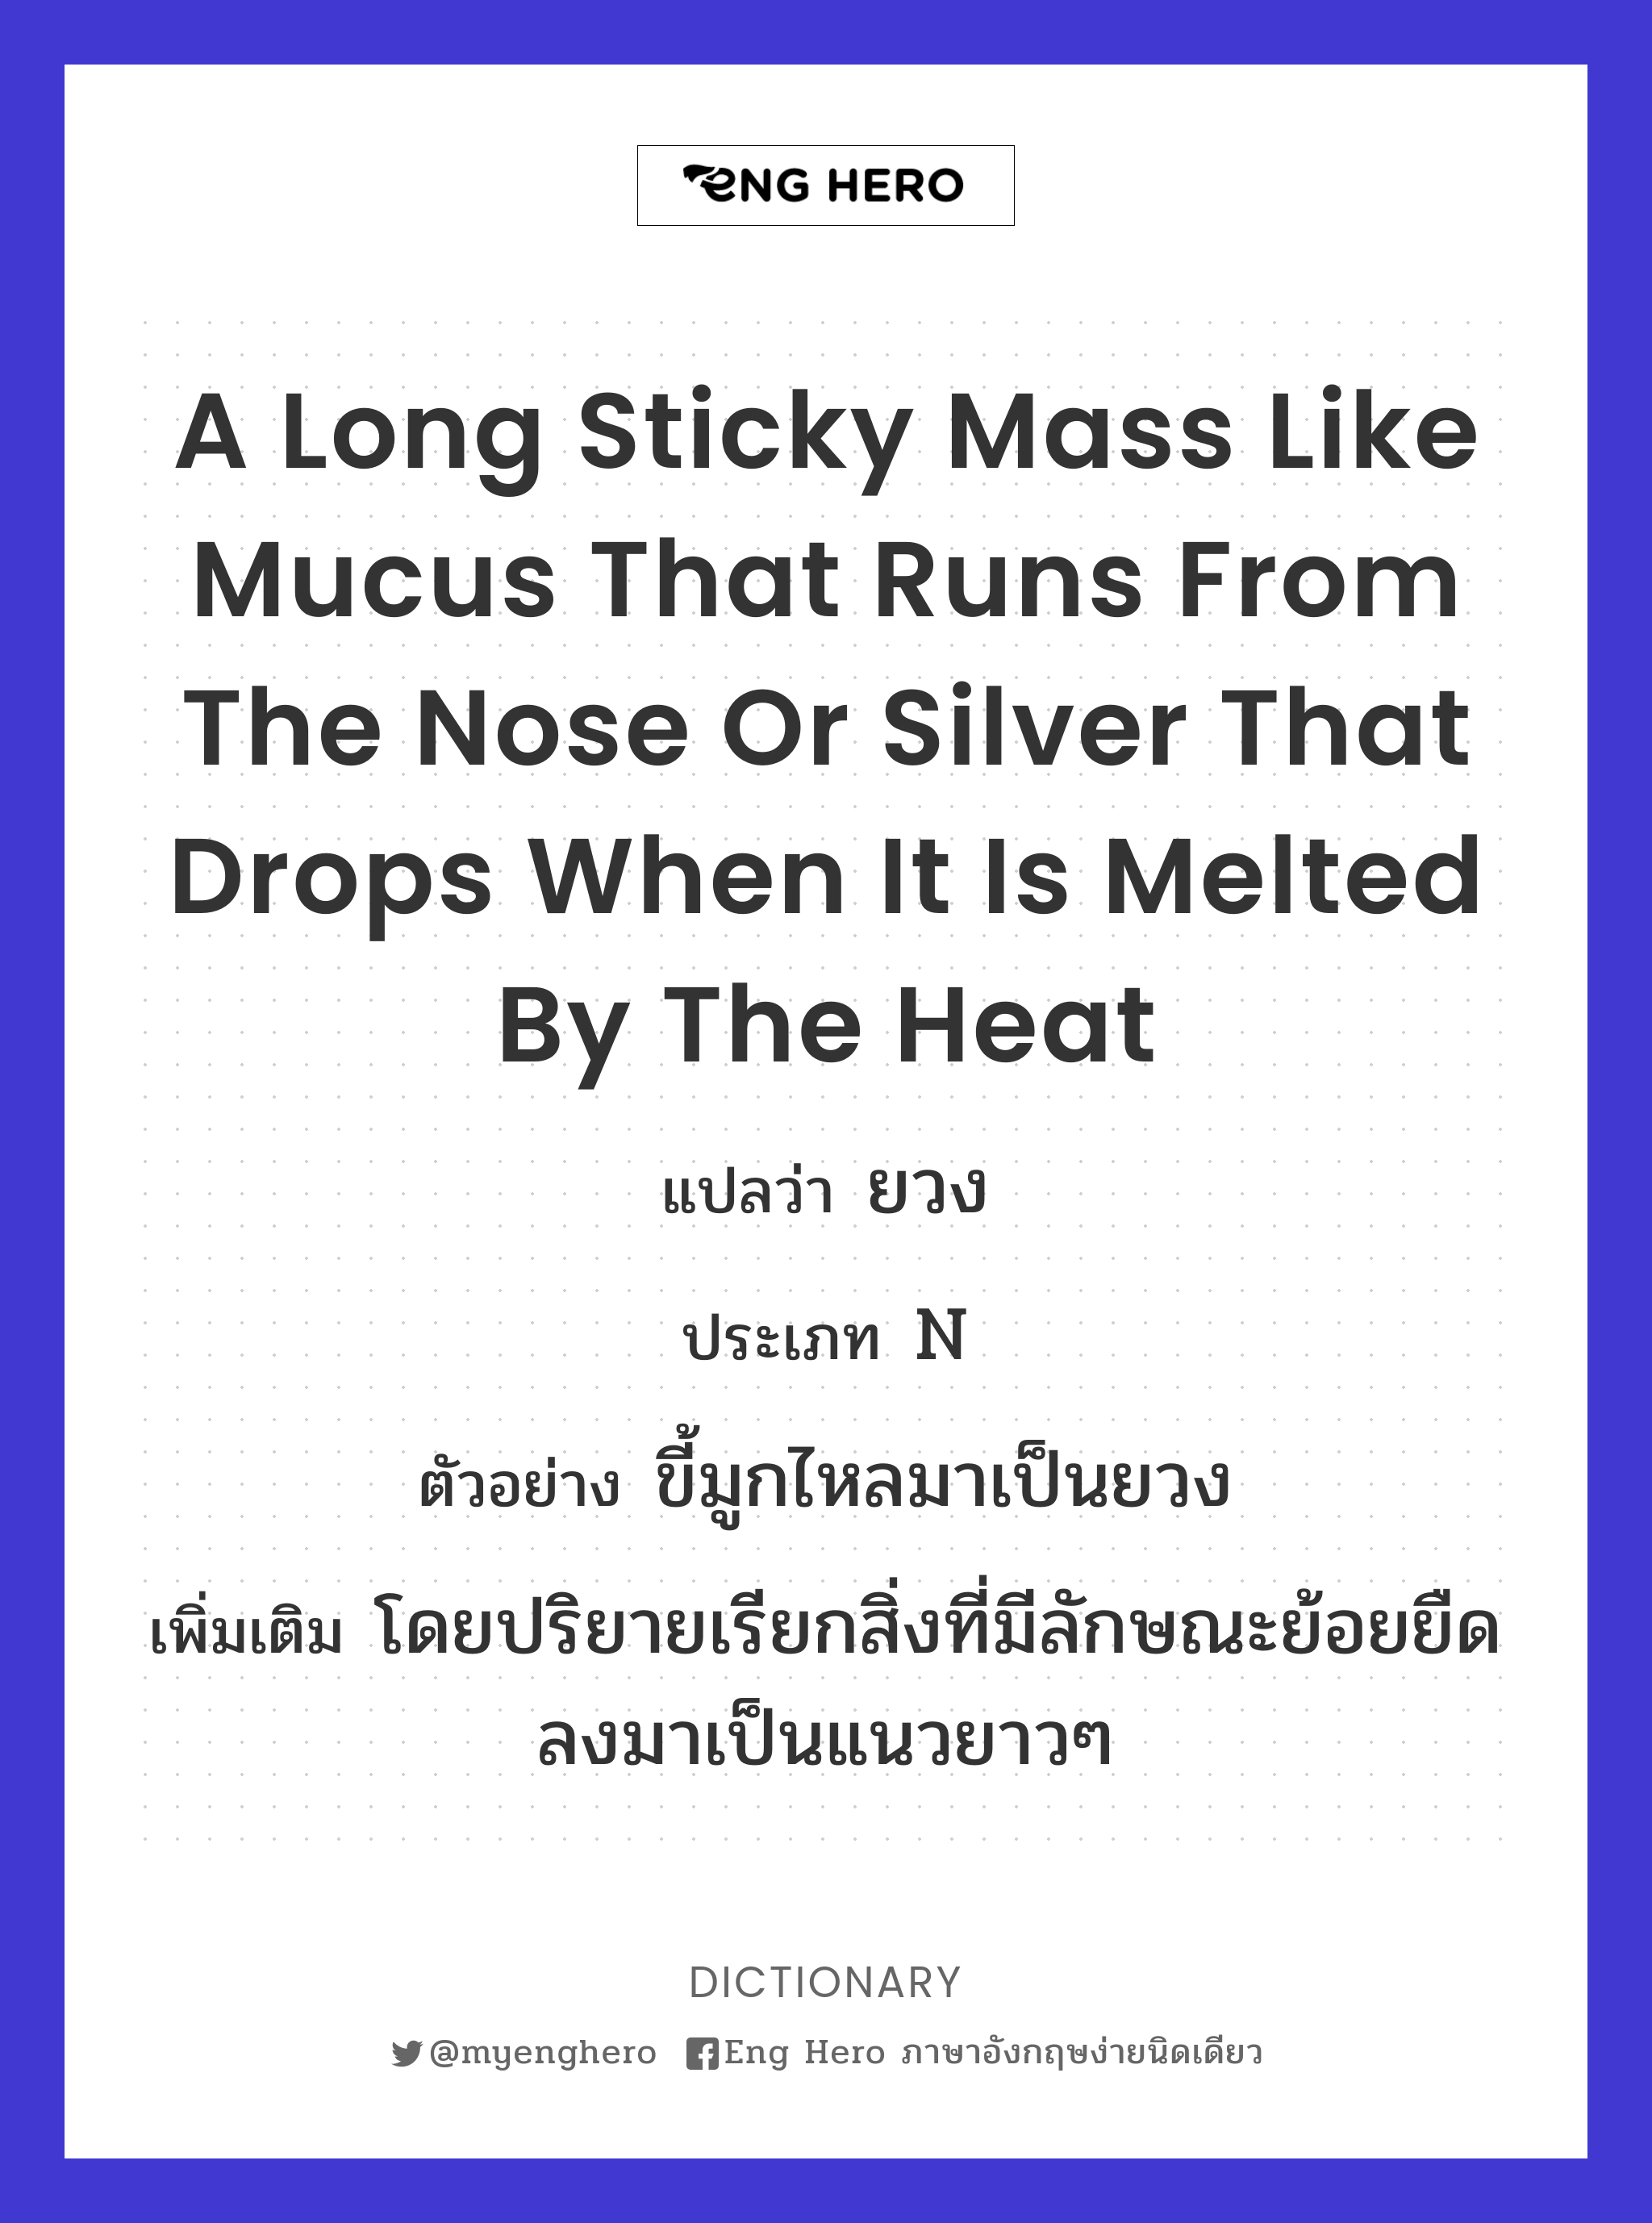 a long sticky mass like mucus that runs from the nose or silver that drops when it is melted by the heat